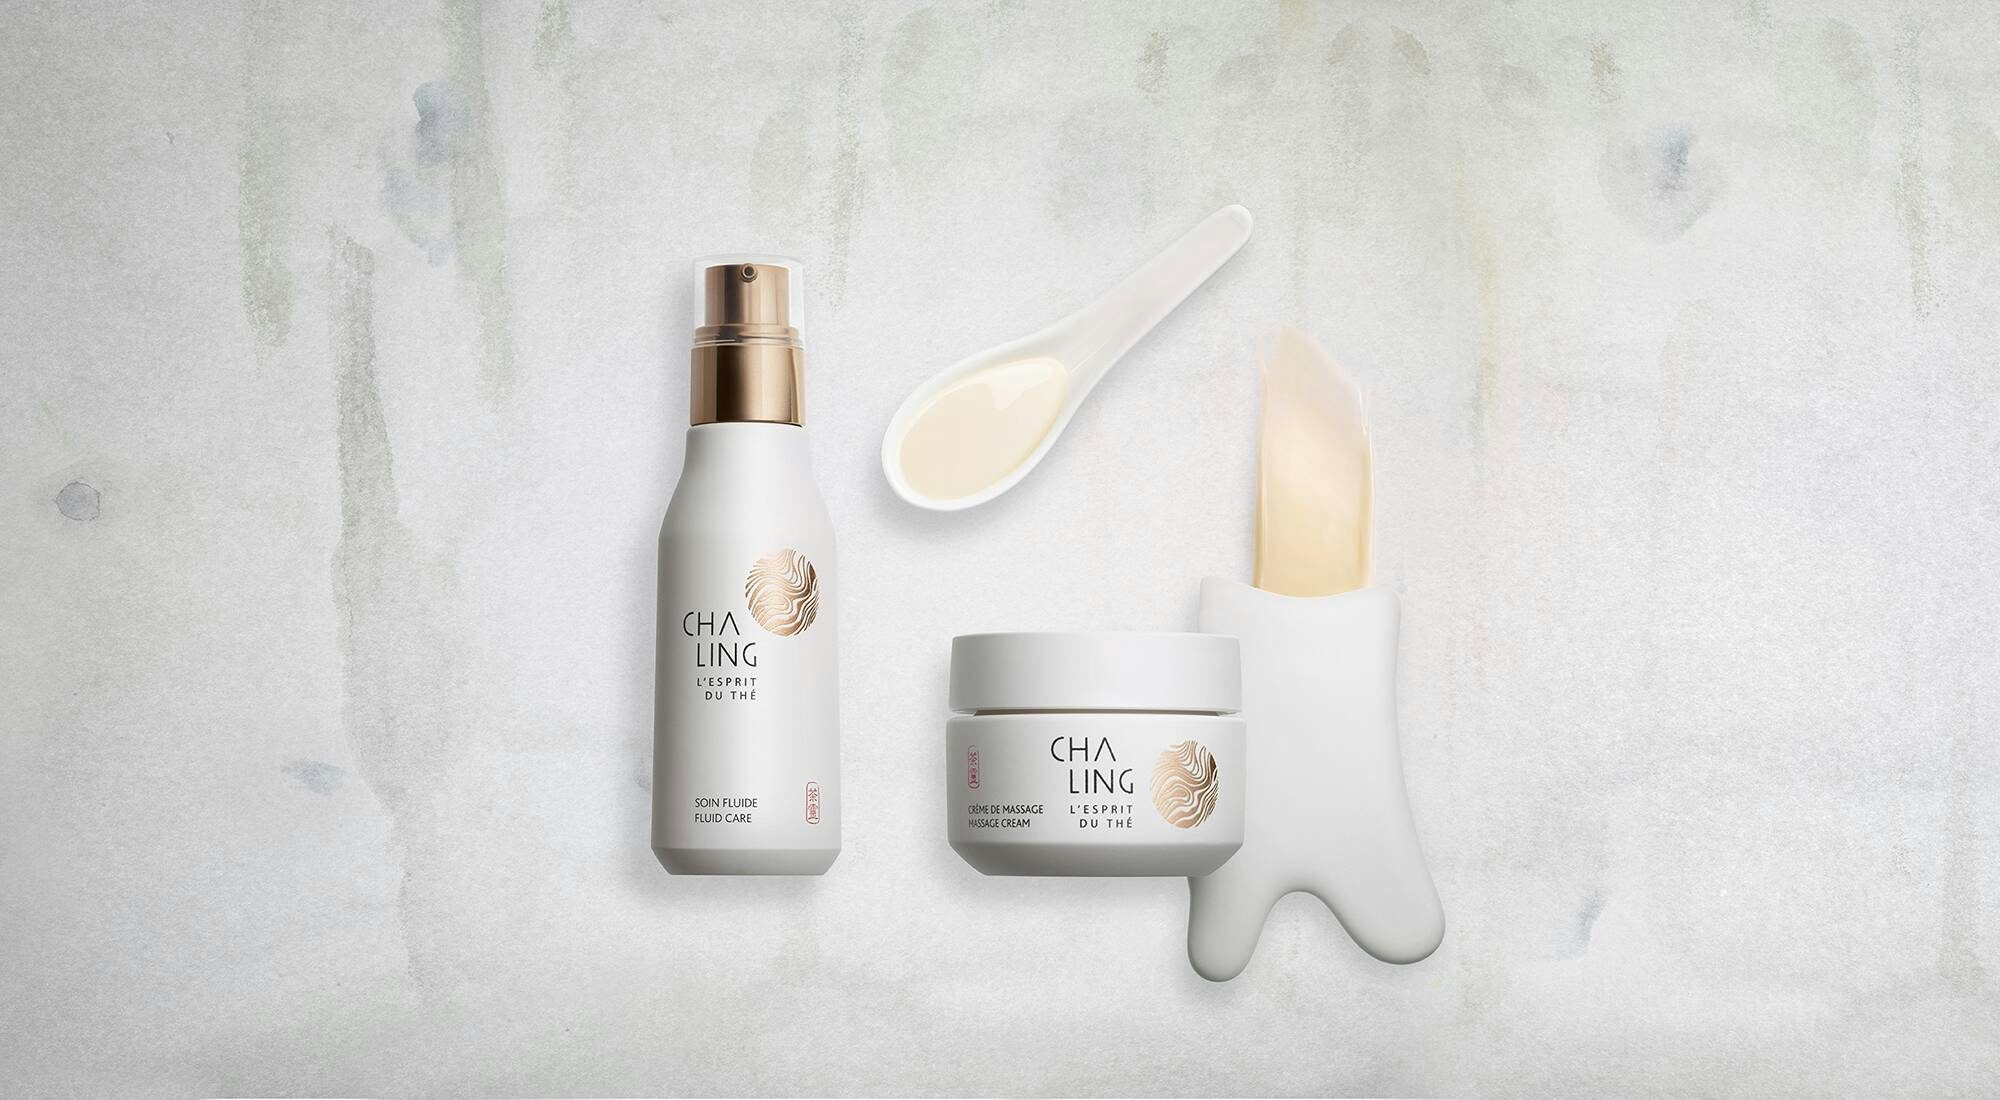 Can Cha Ling, a Local Beauty Brand Backed by LVMH, Succeed in China and Beyond?